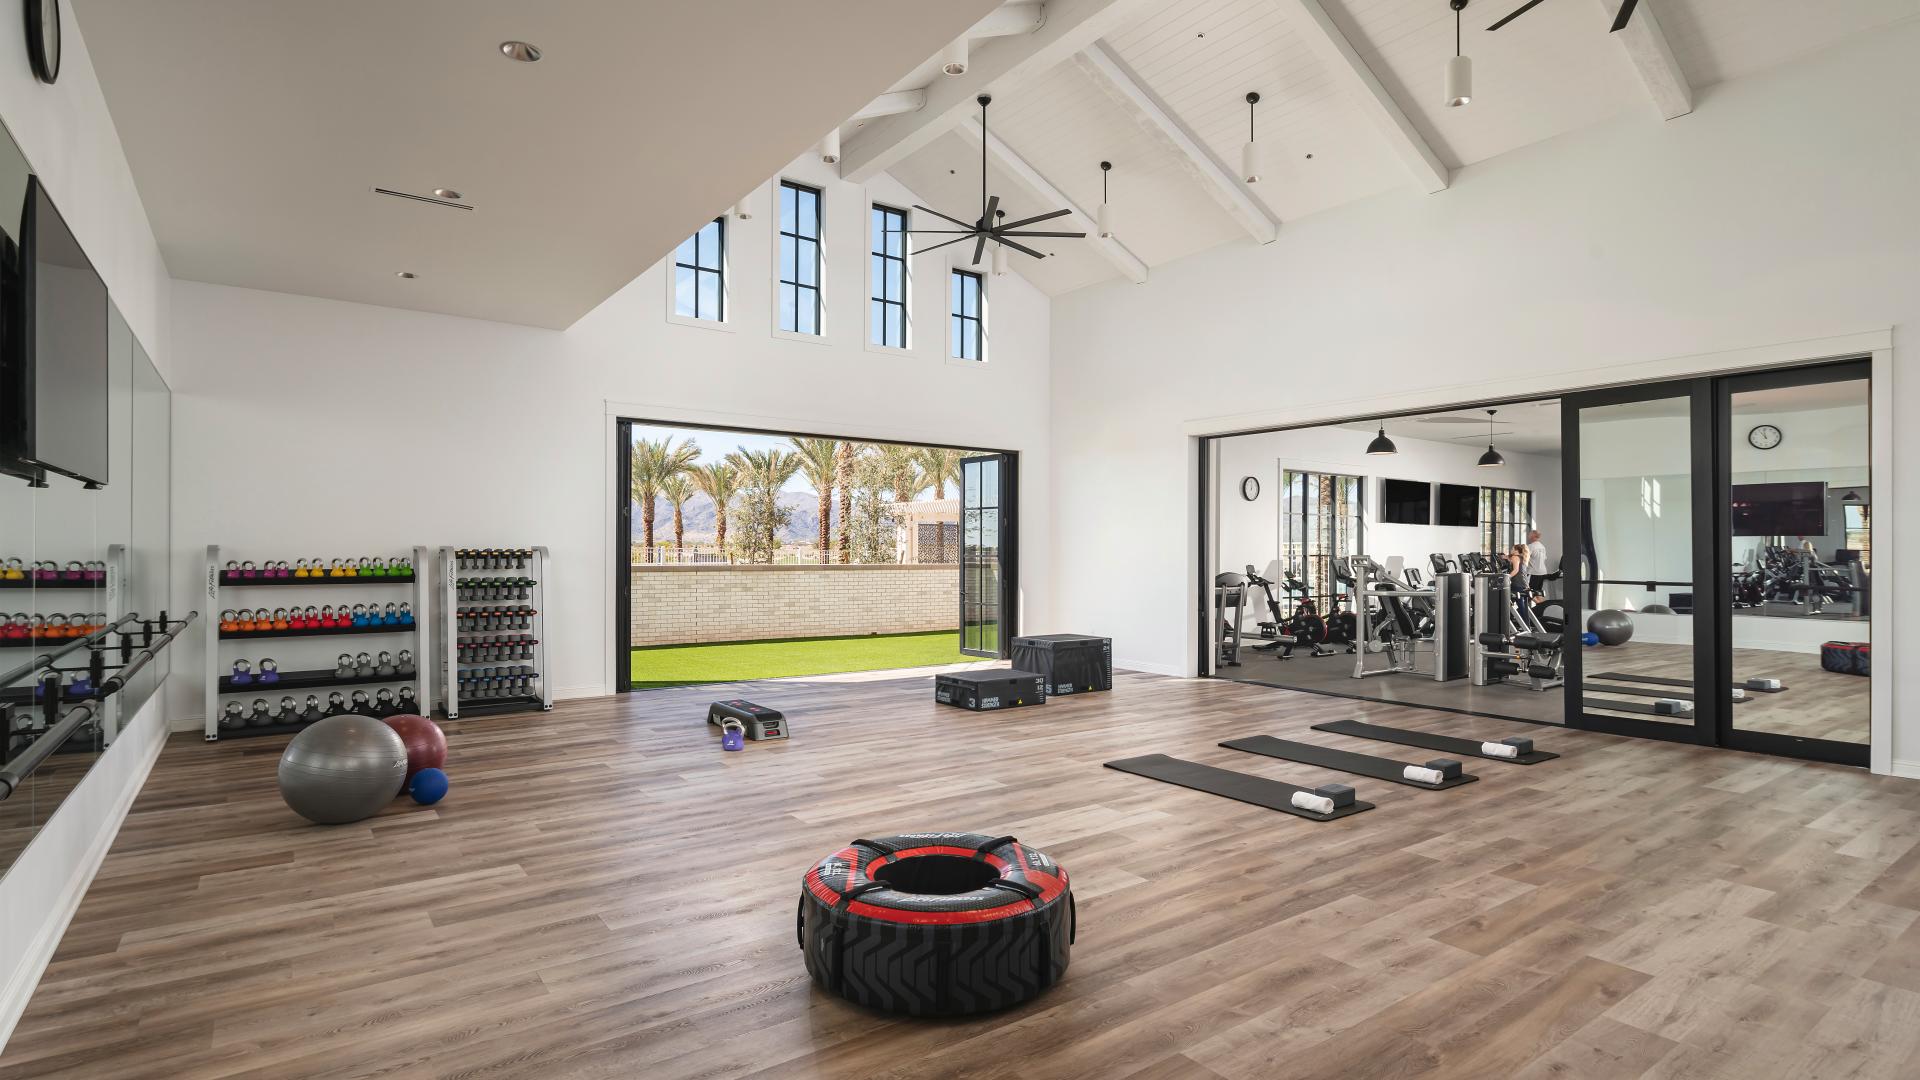 State-of-the-art fitness center and movement studio